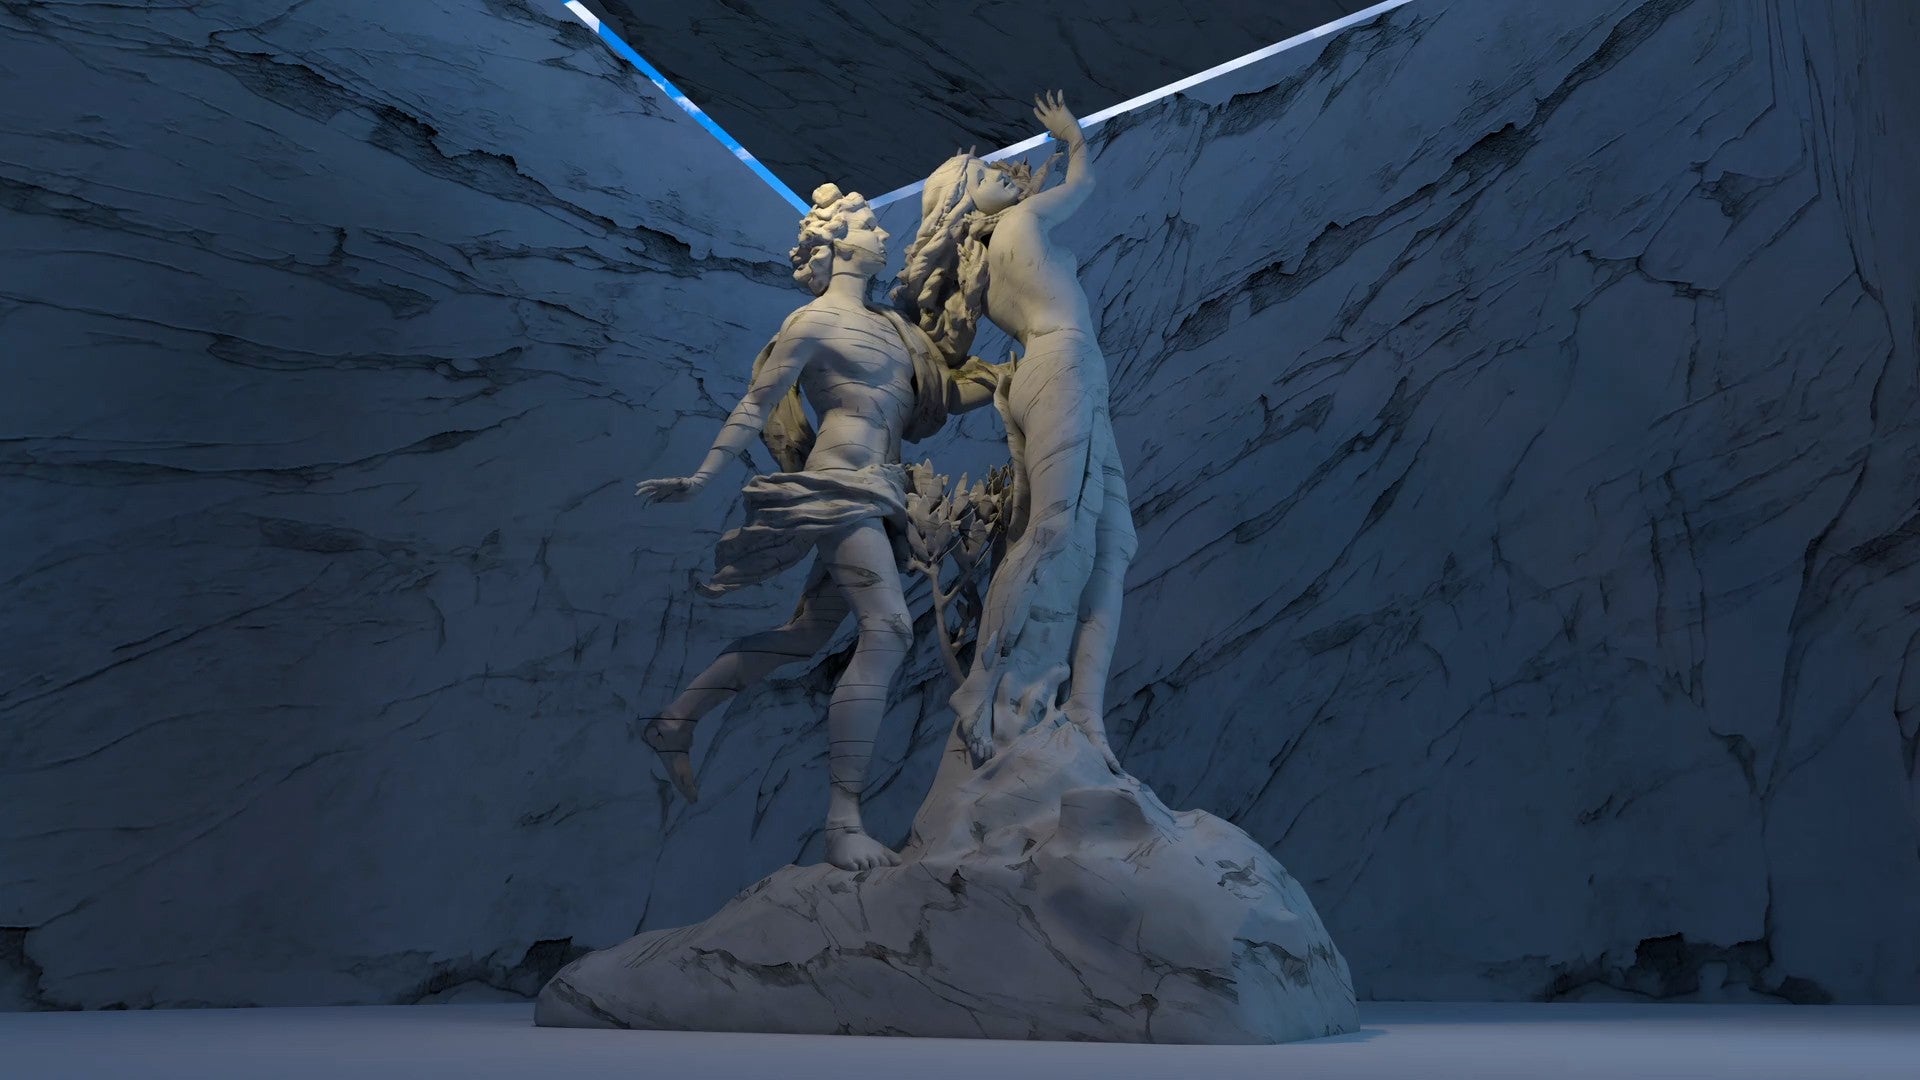 A classical sculpture illuminated by a sharp line of blue light, creating a striking contrast between the marble figures and the rough stone background, presented as a thumbnail for a video art installation.